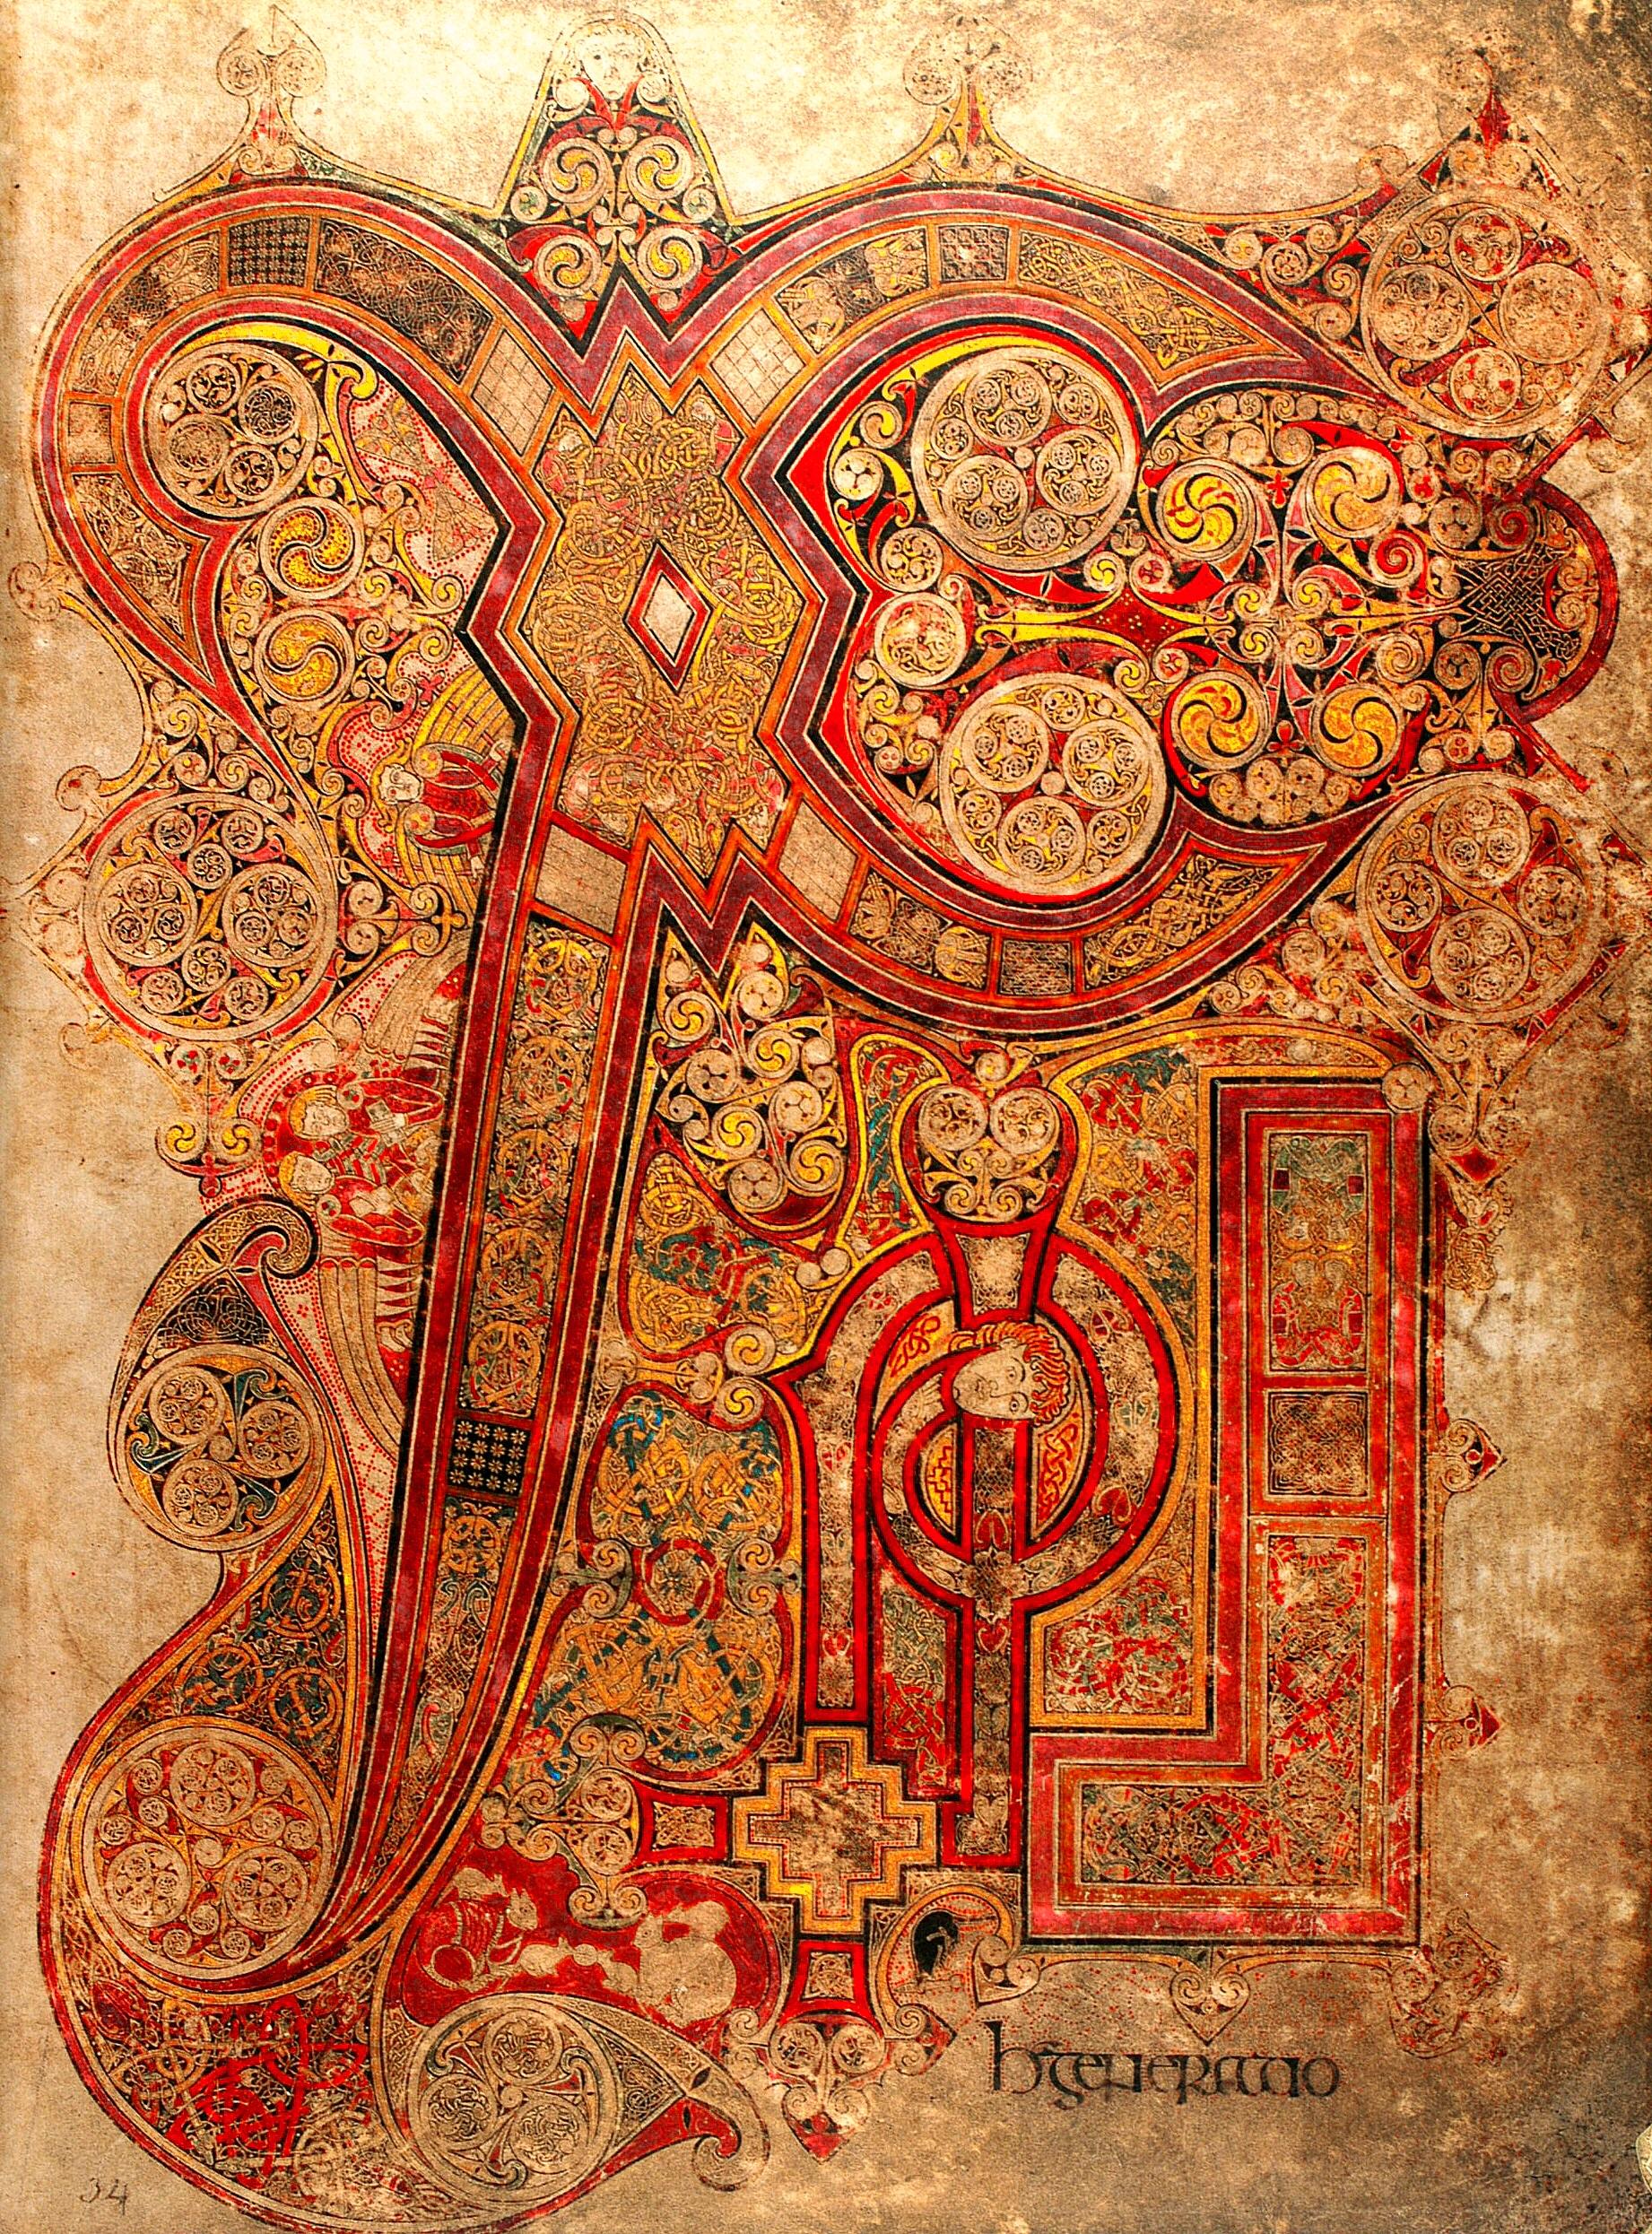 Book of Kells by Unknown Artist - c. 800 - - Trinity College